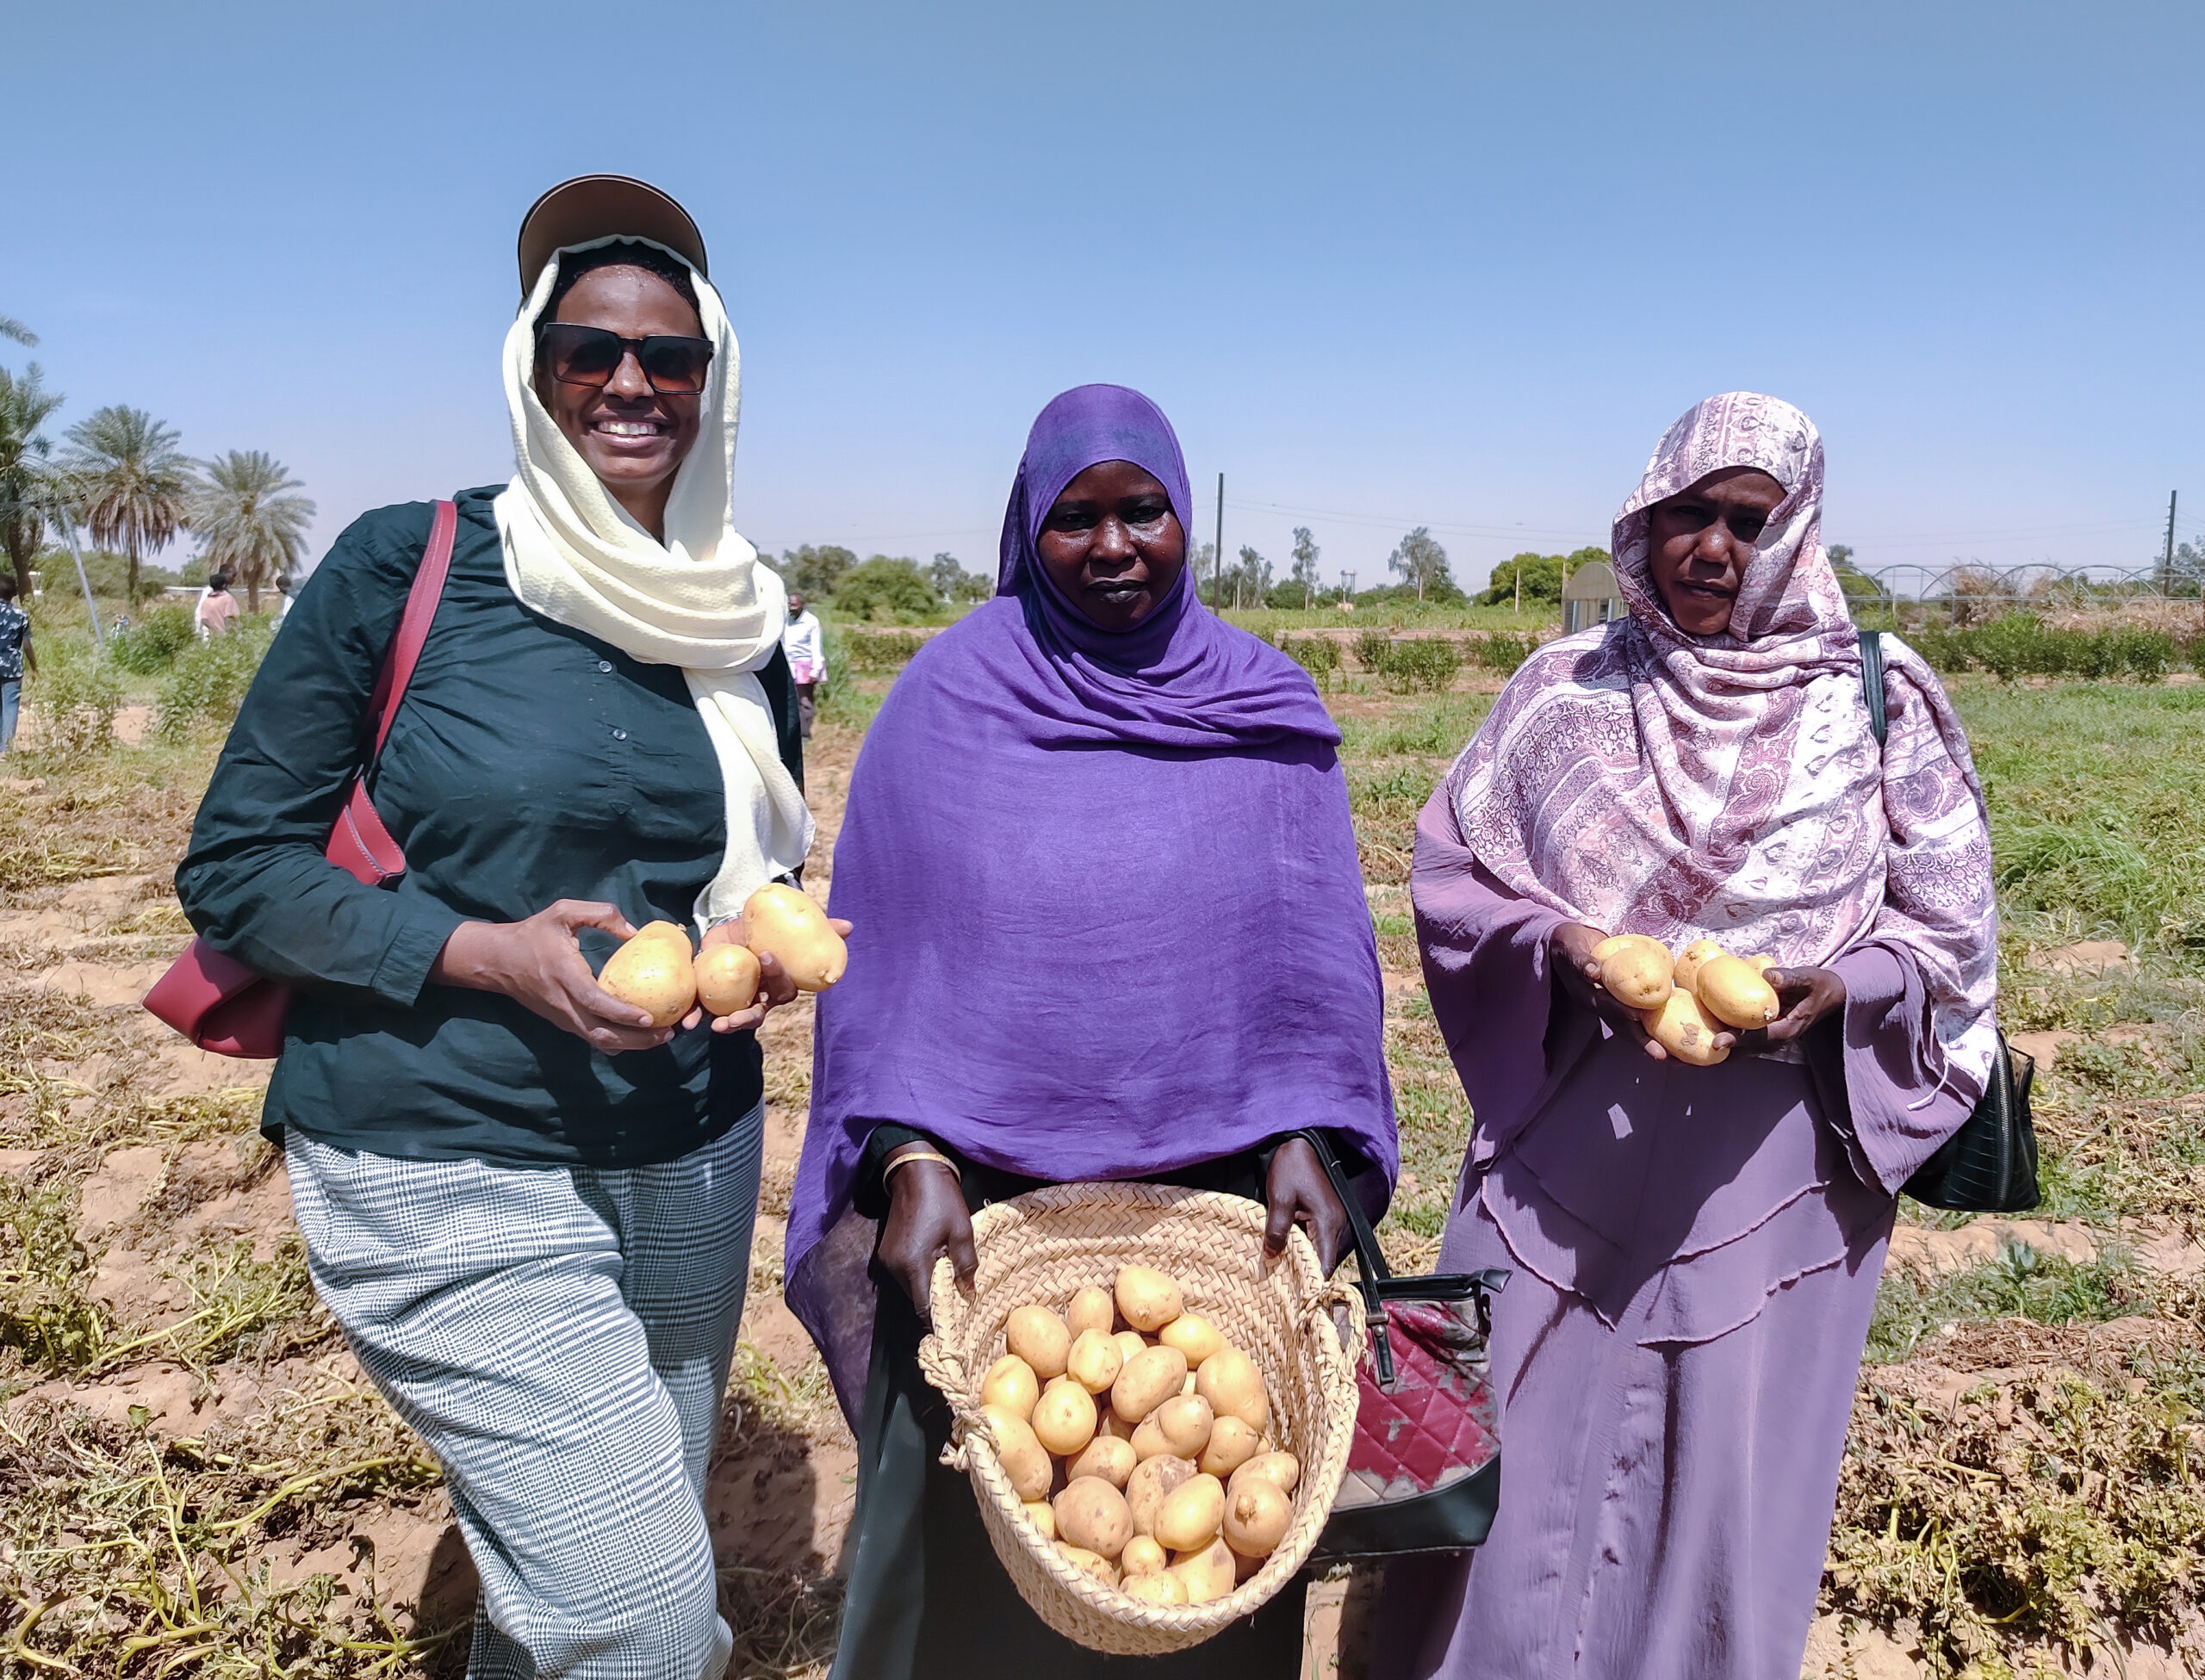 Three women in headscarves stand in an open field, holding harvested potatoes. One has a basket full of potatoes. The background shows vegetation and clear blue sky.